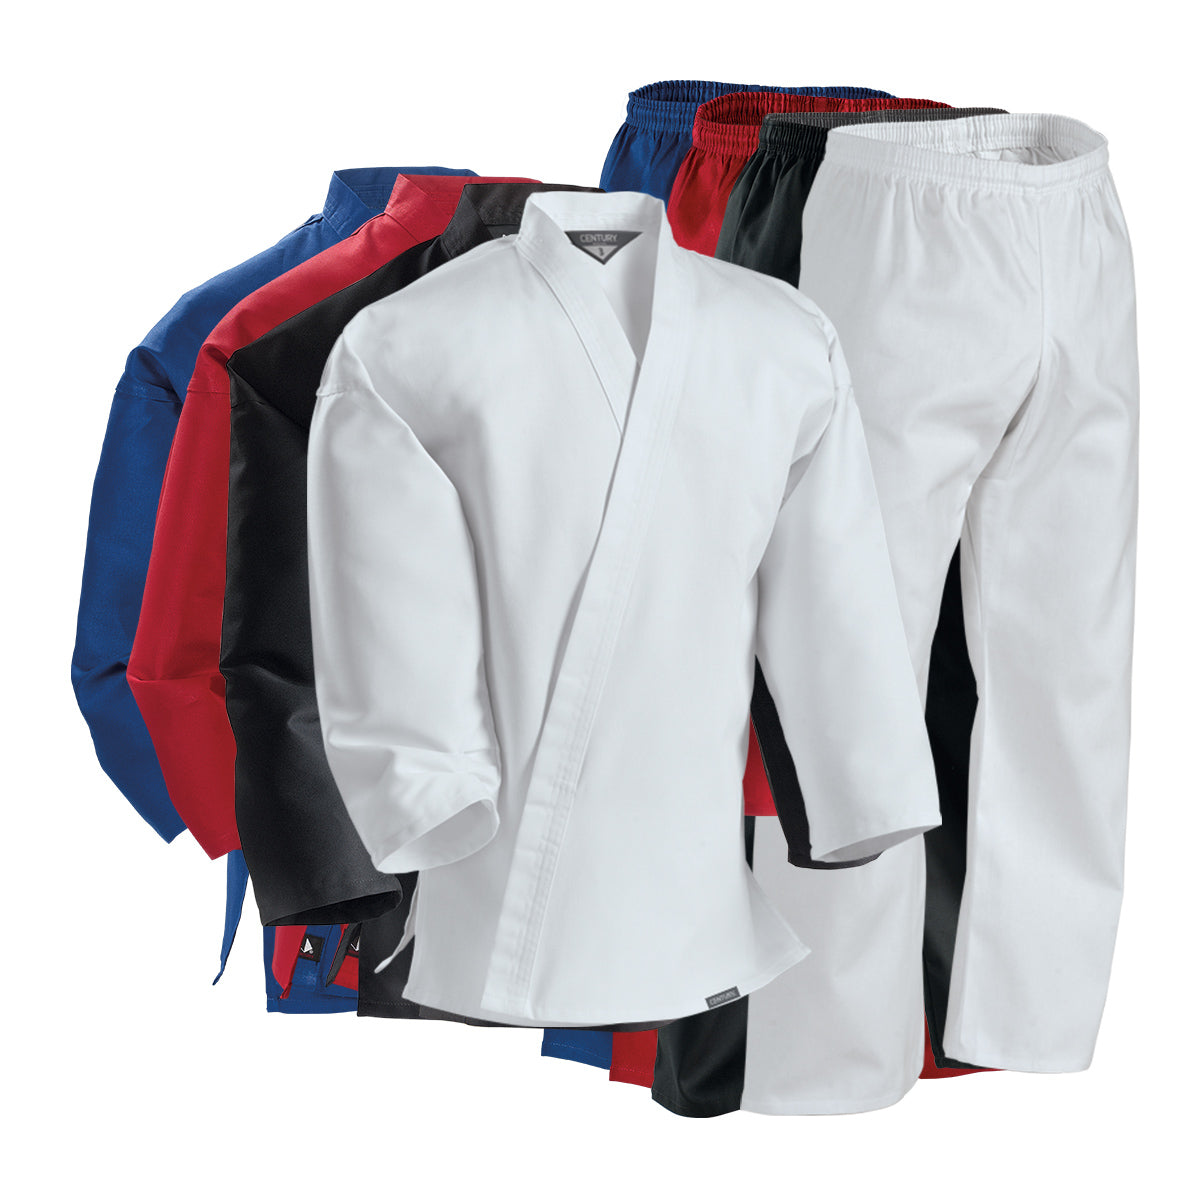 7 oz. Middleweight Student Uniform with Elastic Pants